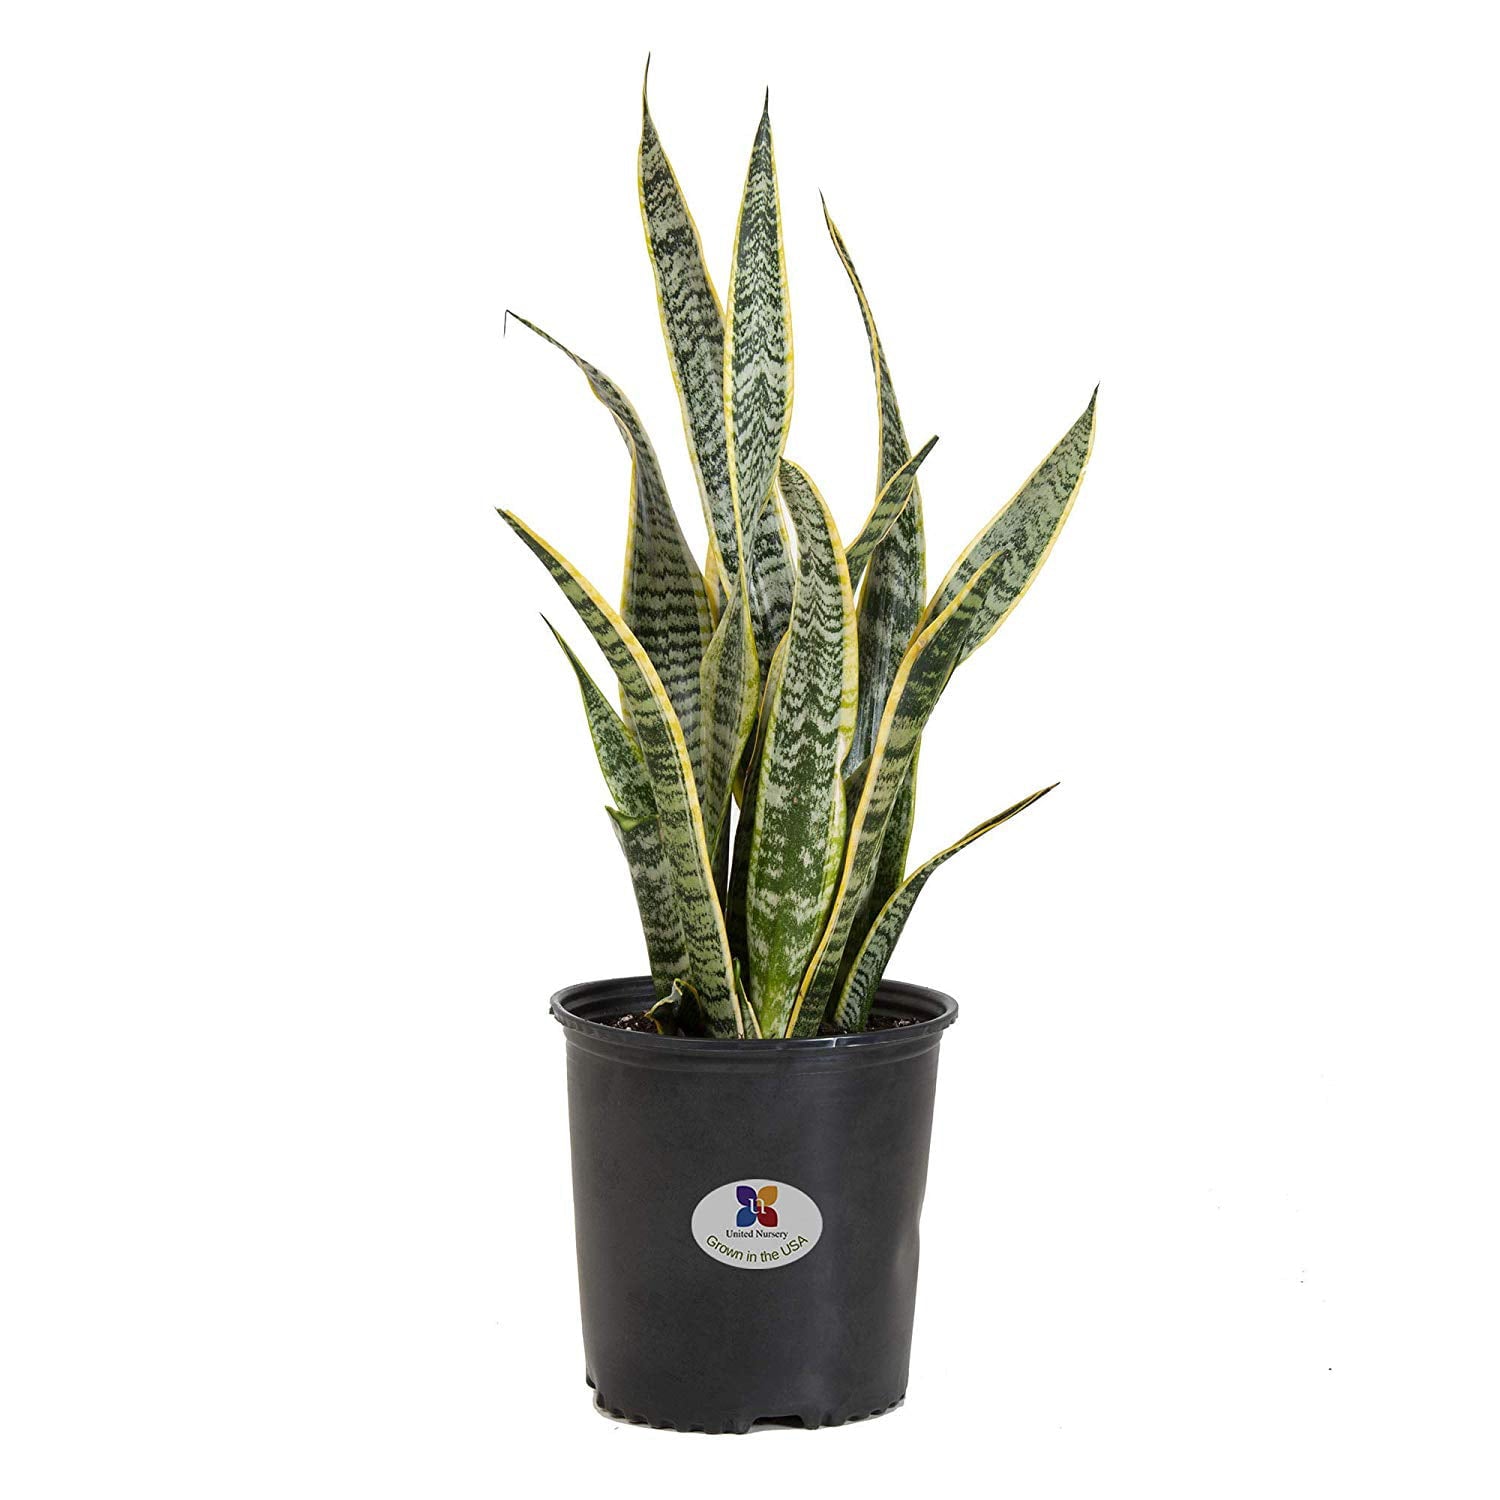 United Nursery Live Sansevieria Laurentii Plant 22-30 Inches Tall in 9.25 Inch Grower Pot